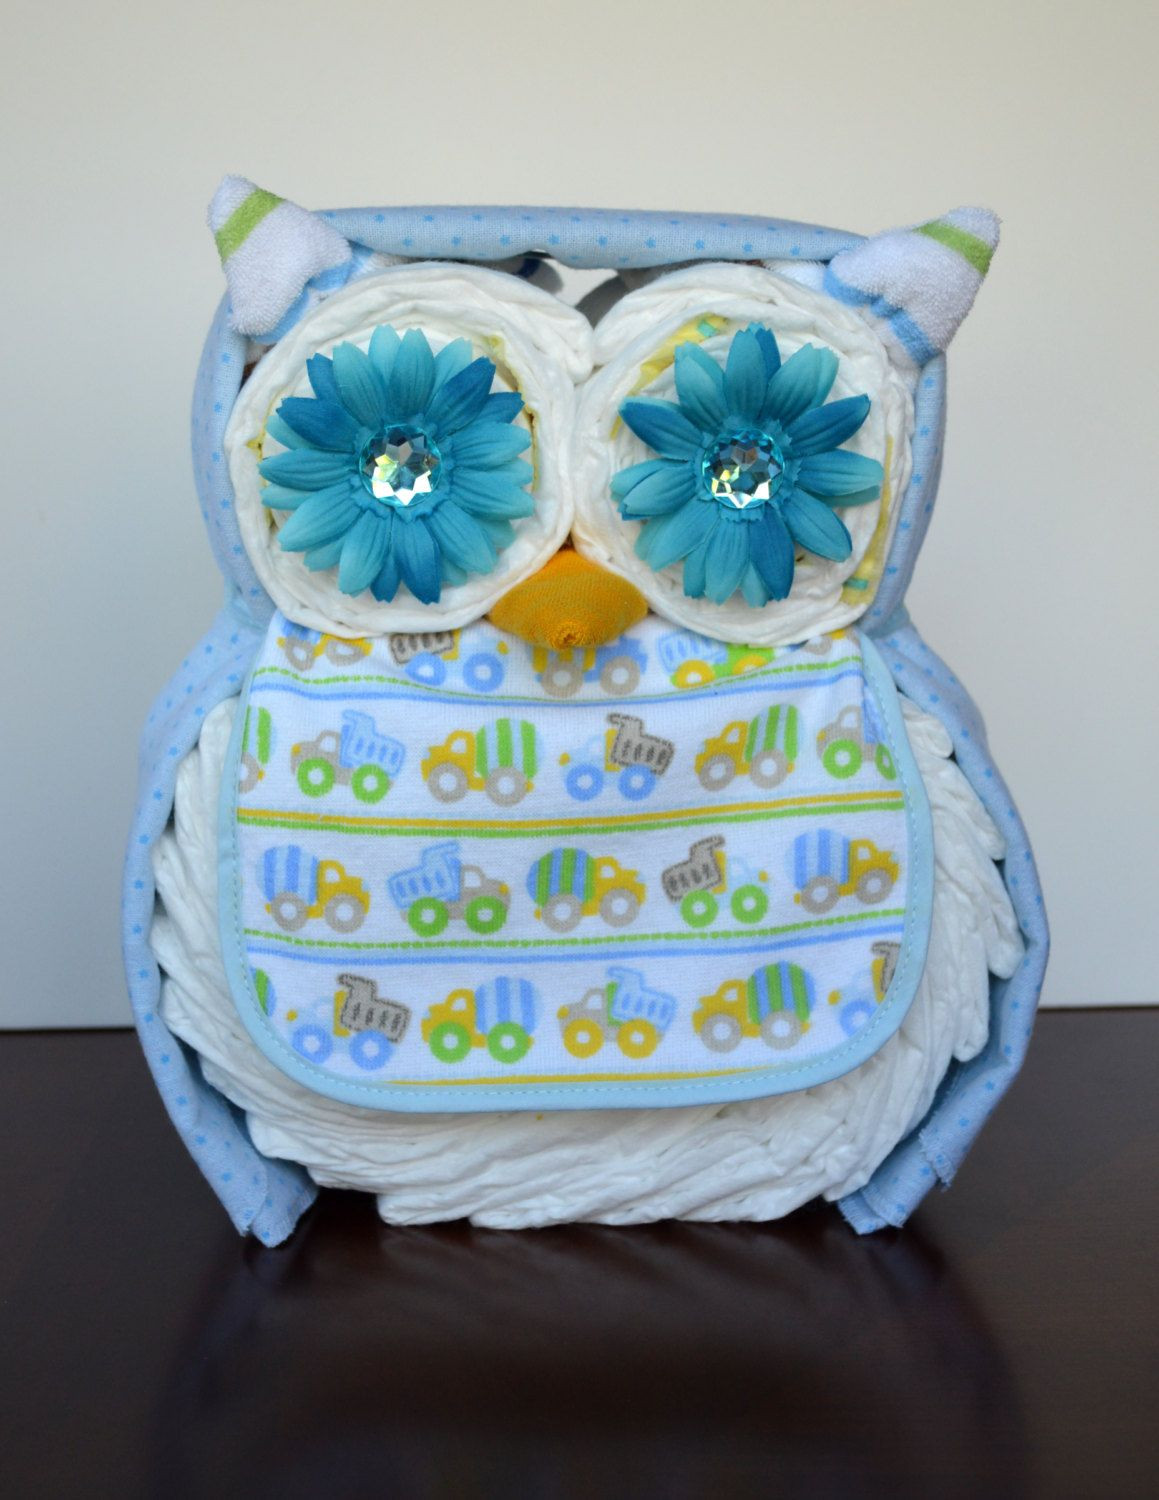 Male Baby Shower Gifts
 Marvelous Good Baby Shower Decor Ideas 21 Owl Diaper